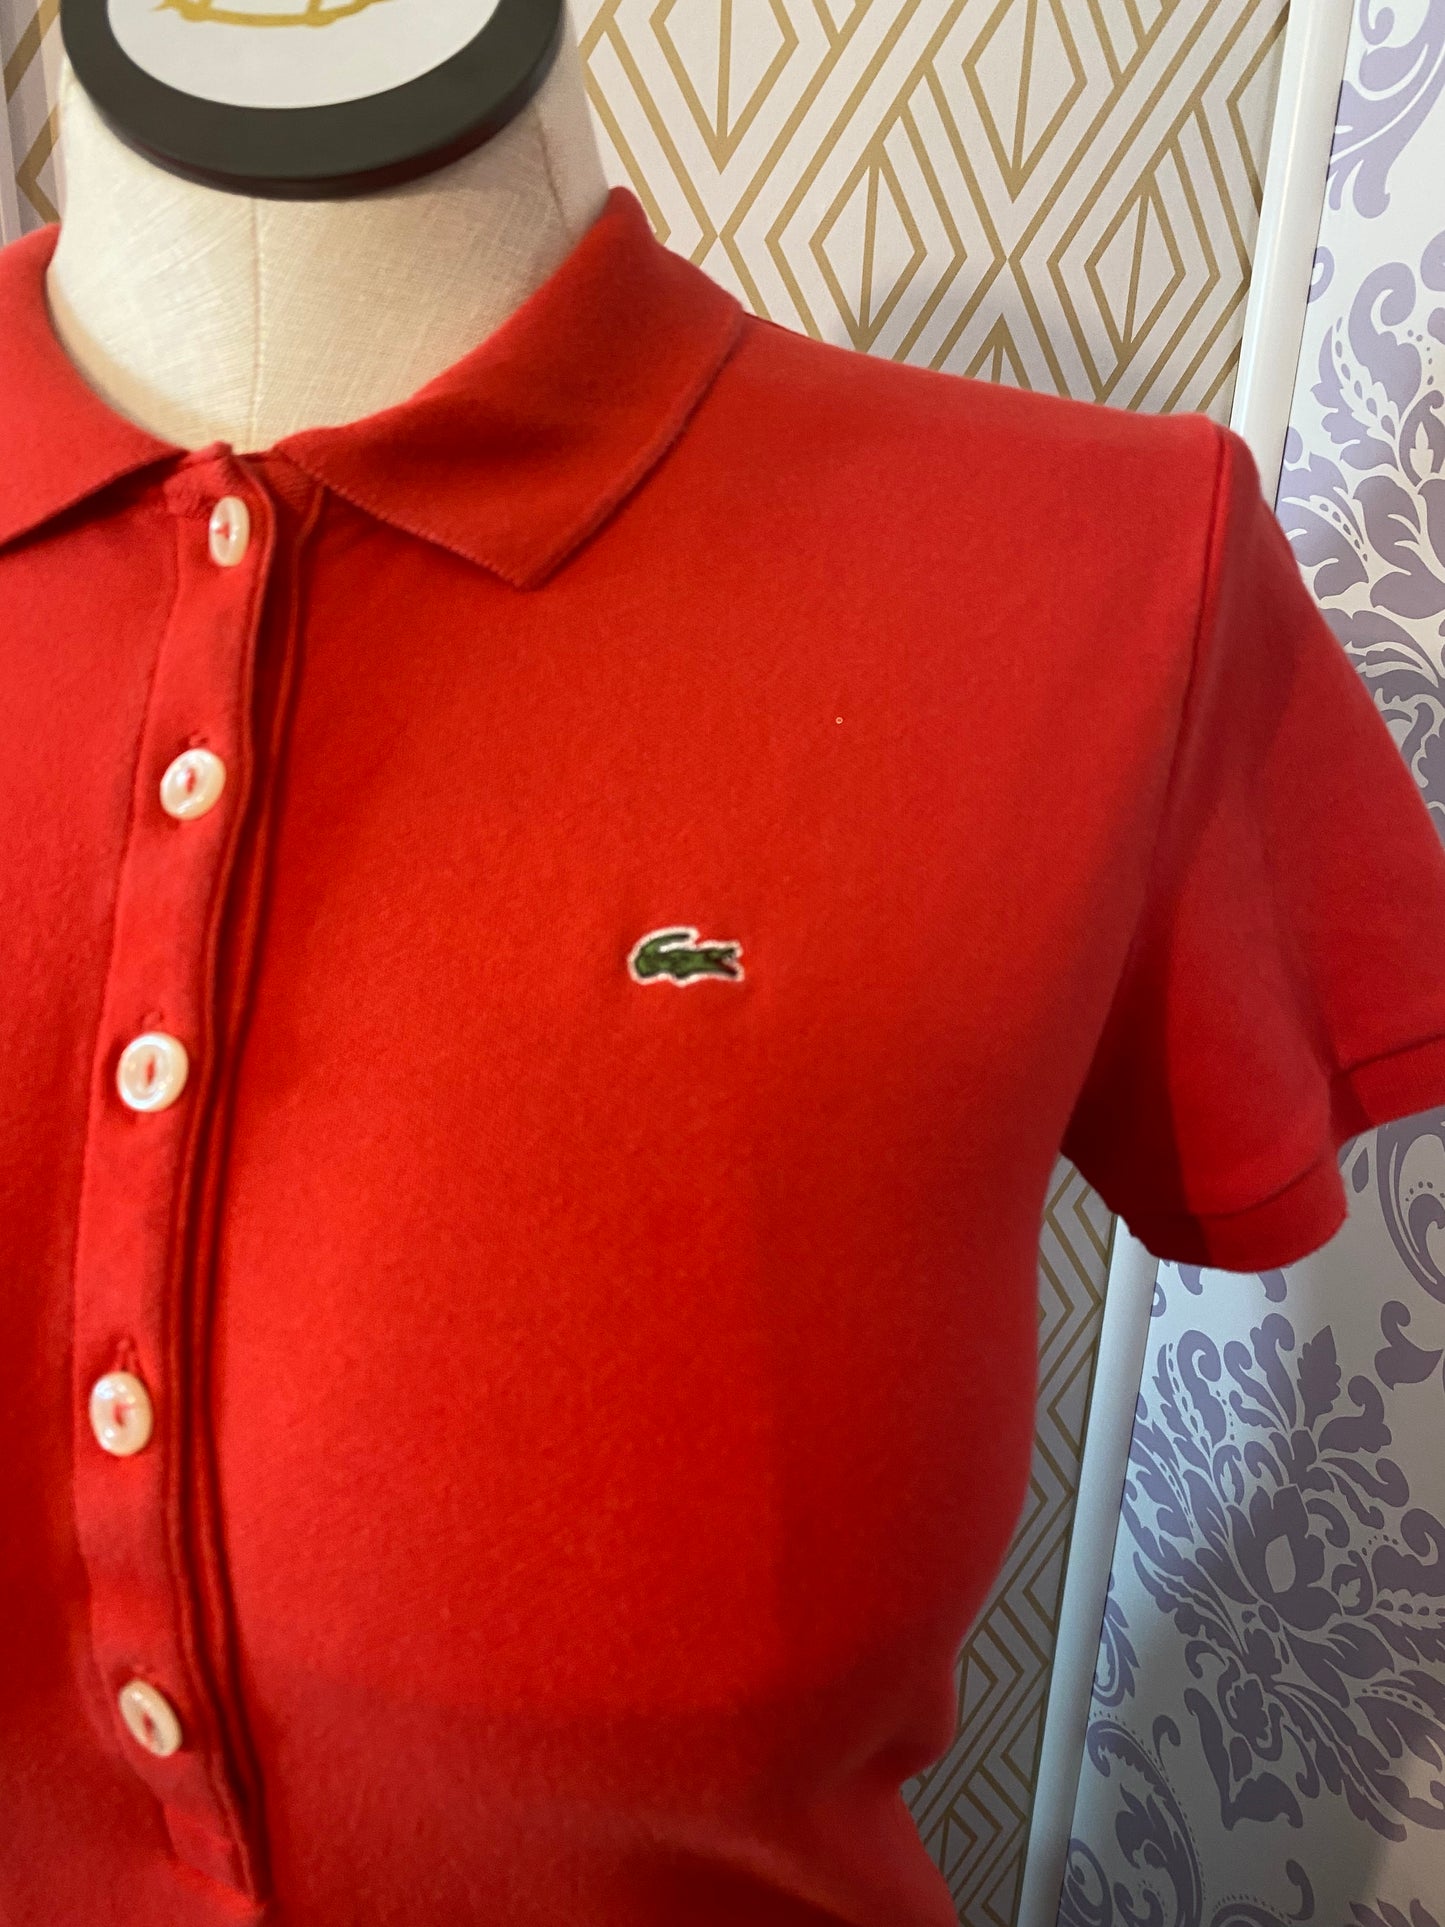 Vintage Lacoste Short Sleeve Red Button Down Shirt - Size 44